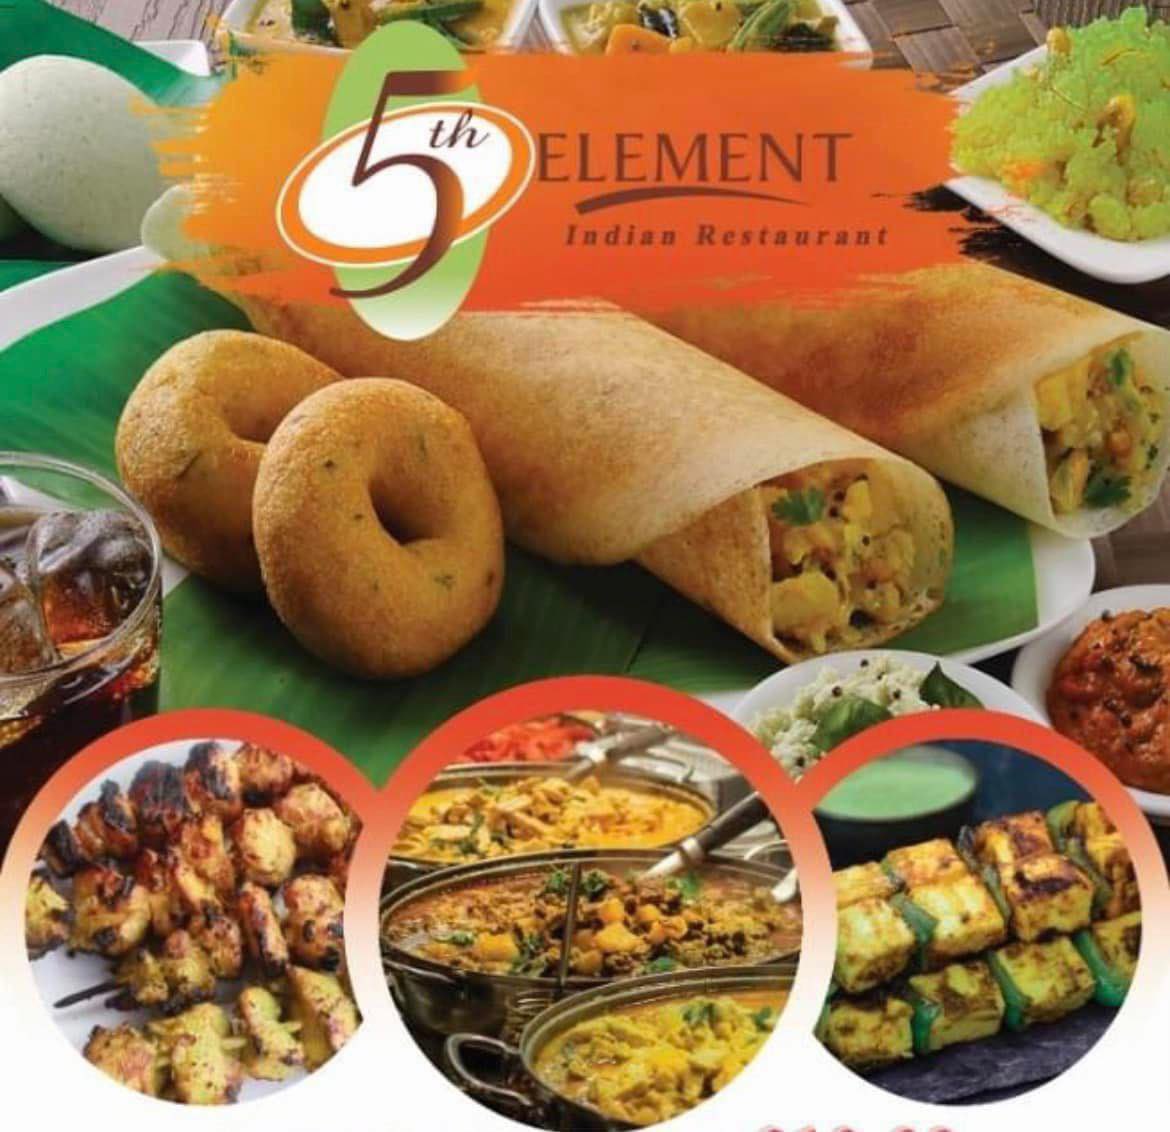 We have something for everyone! What is your favorite dish? Treat a friend to lunch or dinner this week! 

#my5thelement #my5thelementpc #indianfood #foodie #indianfoodie #eatlocal #veggies #indianflavors #spice #palmcoast #daytonabeach #yummy #followis #follownow